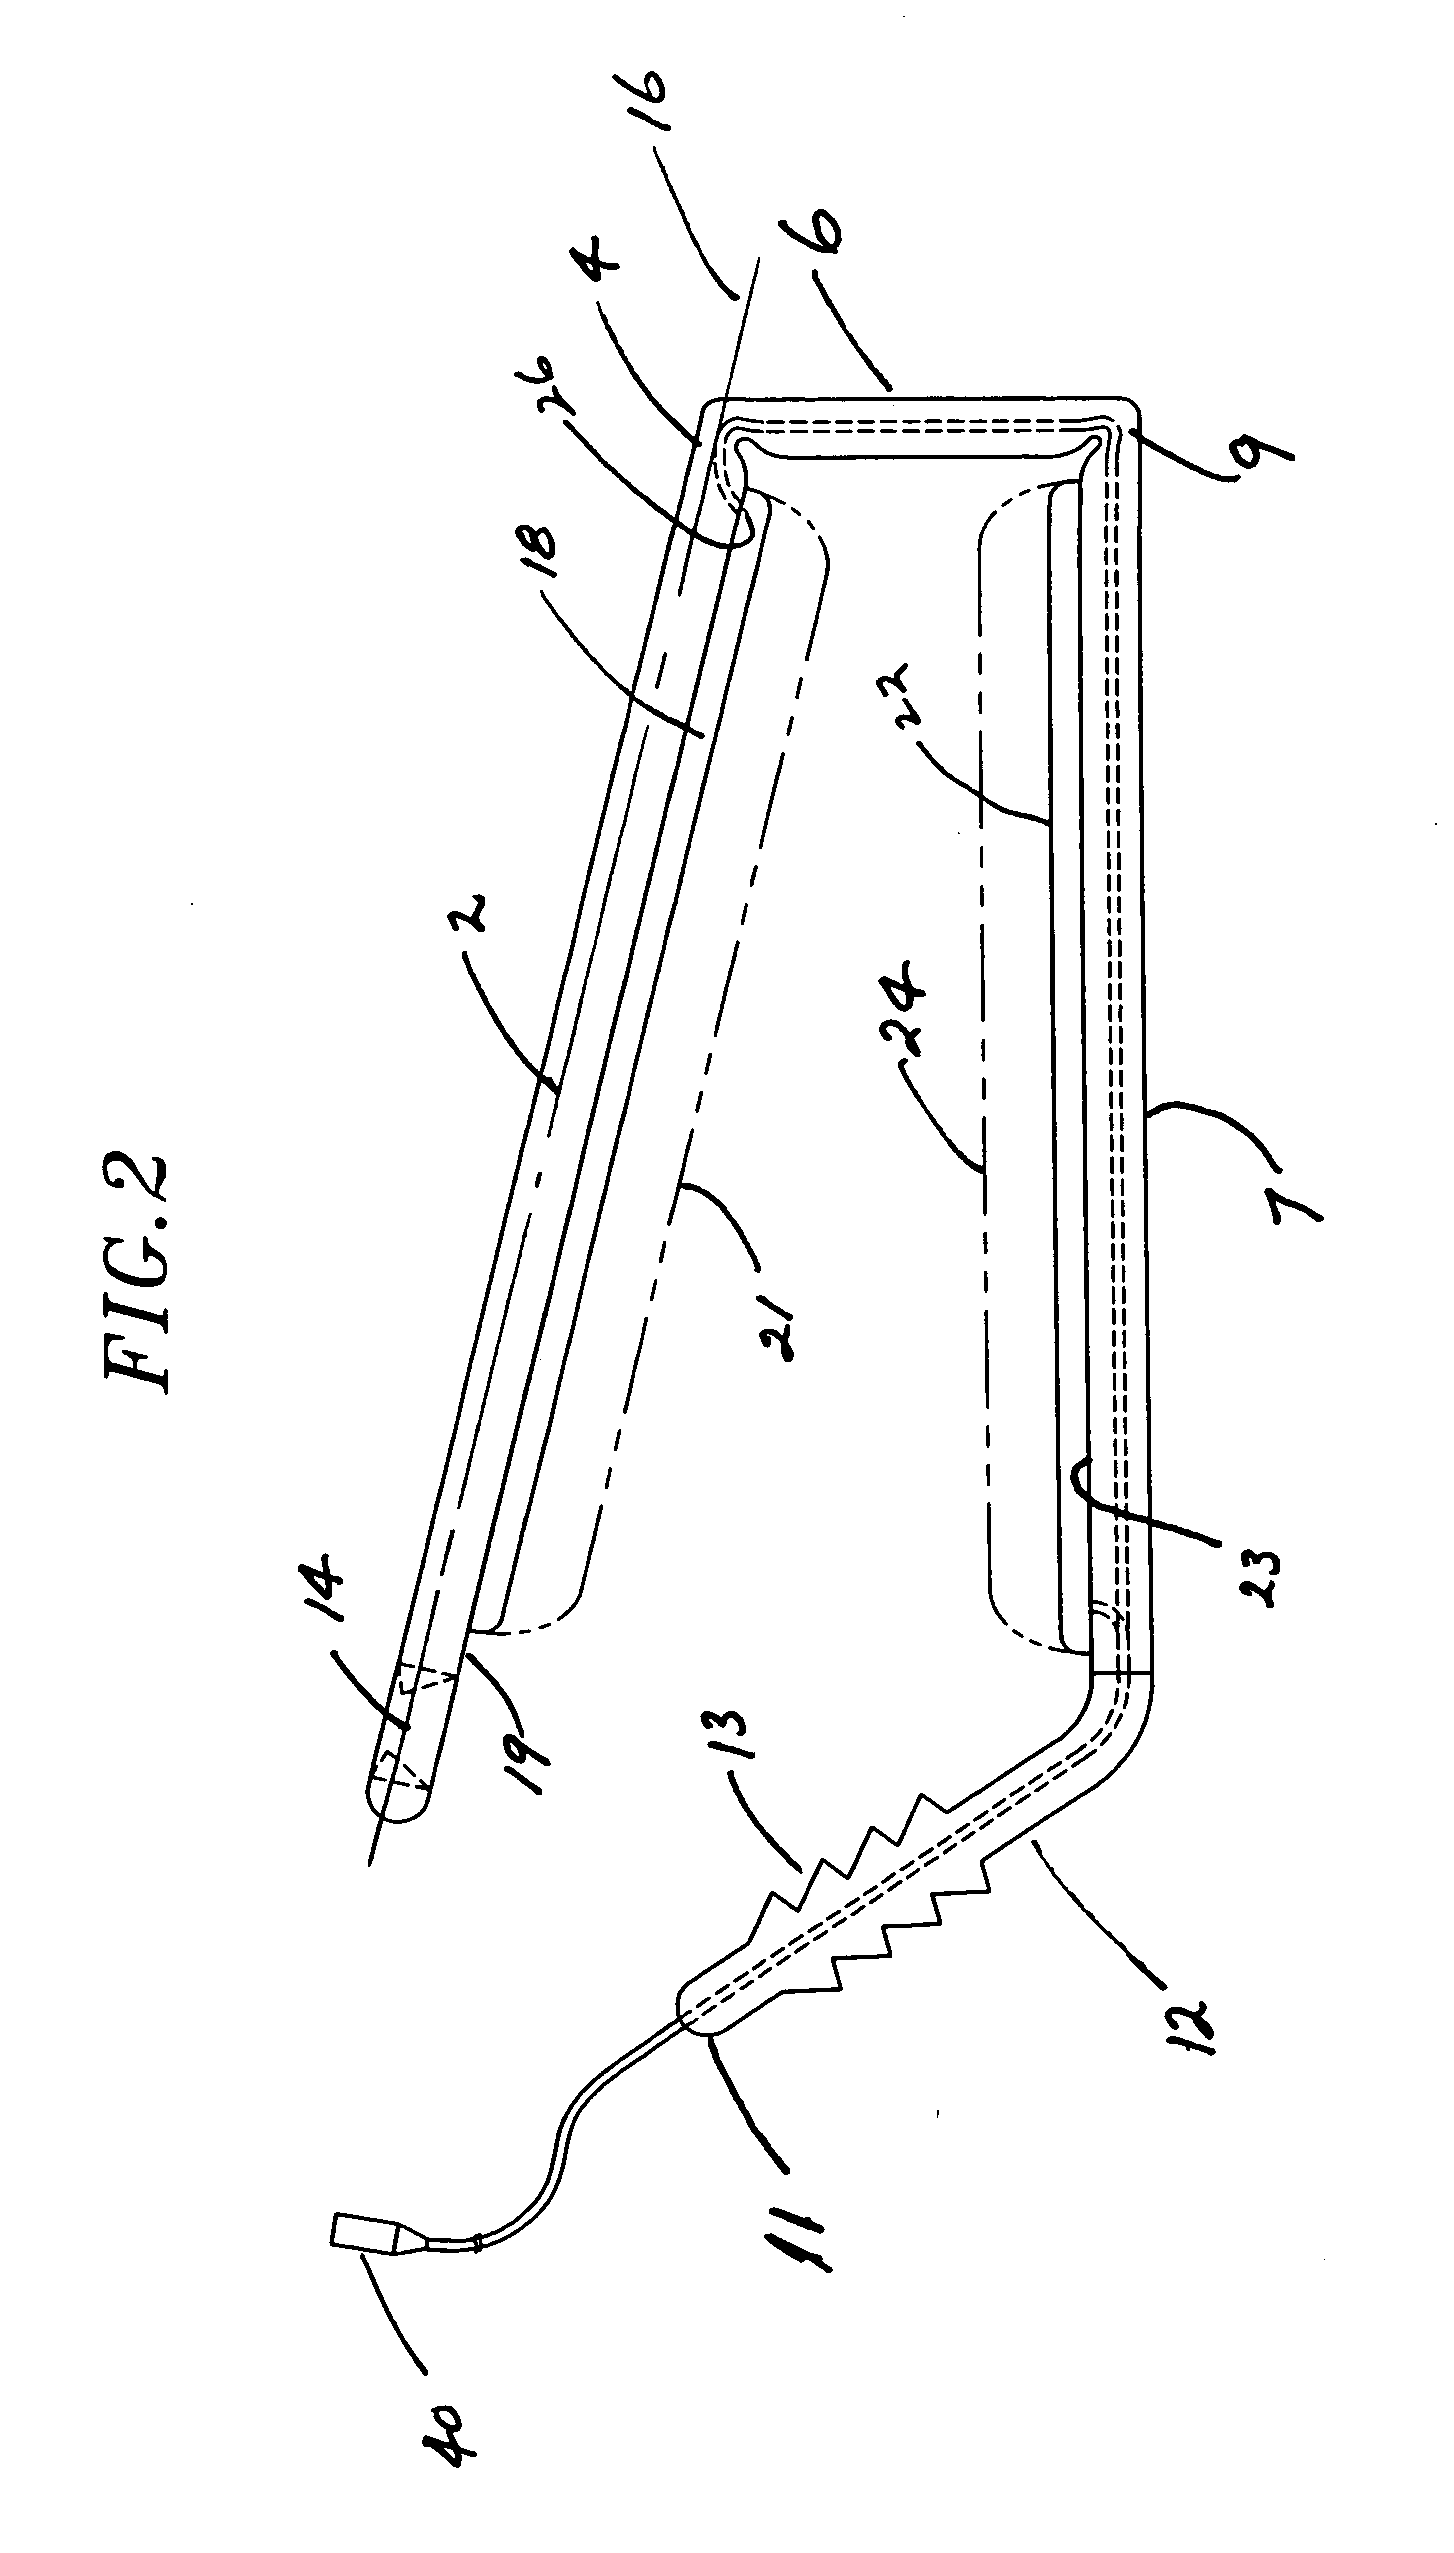 Clamp device to plicate the stomach